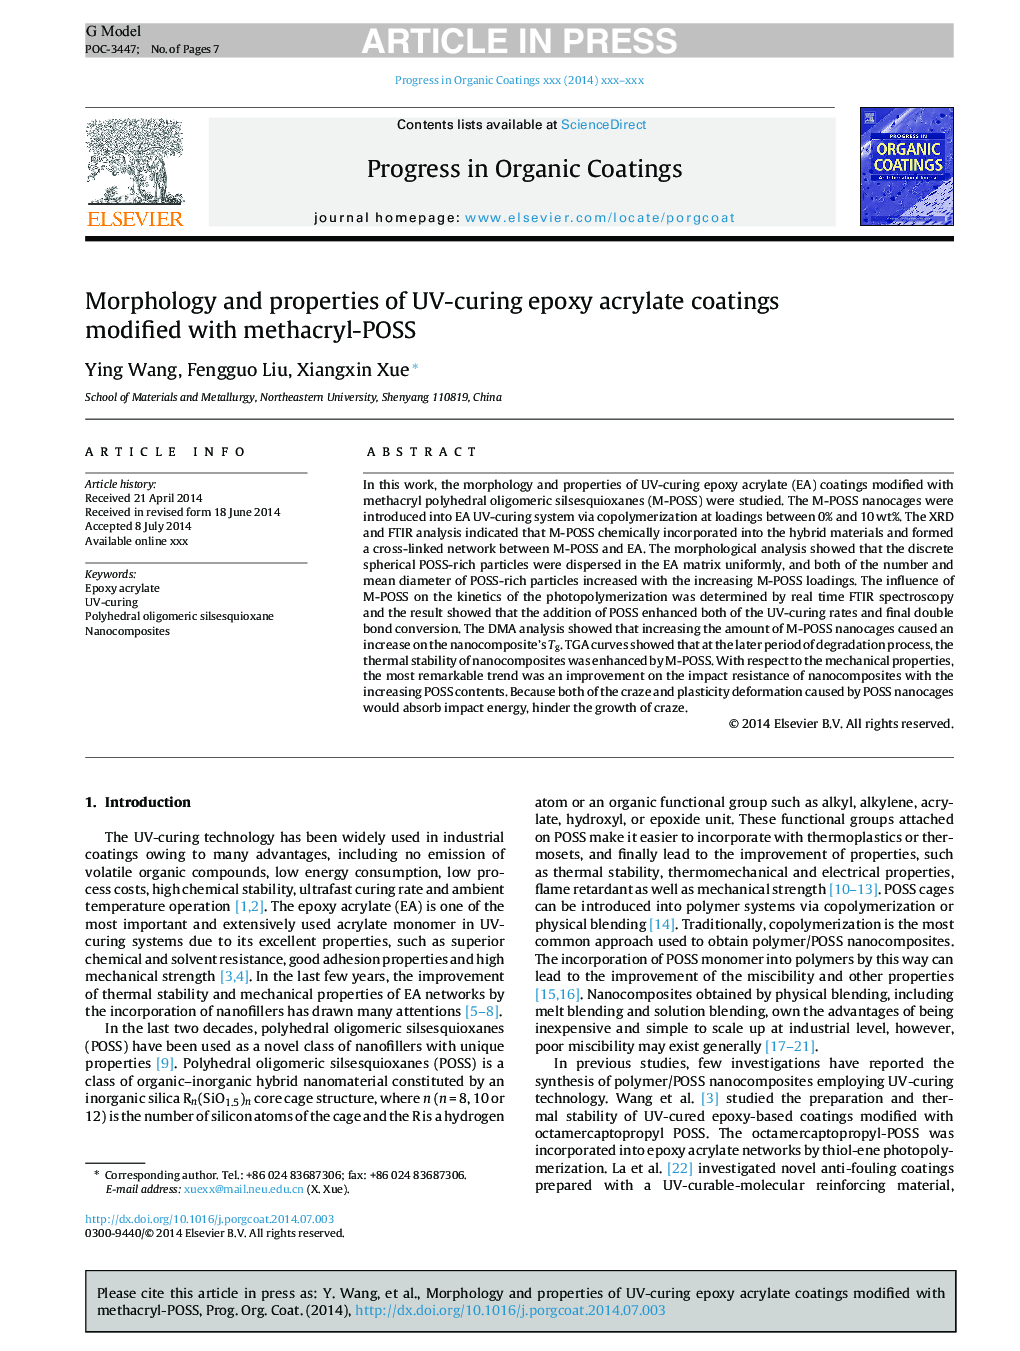 Morphology and properties of UV-curing epoxy acrylate coatings modified with methacryl-POSS